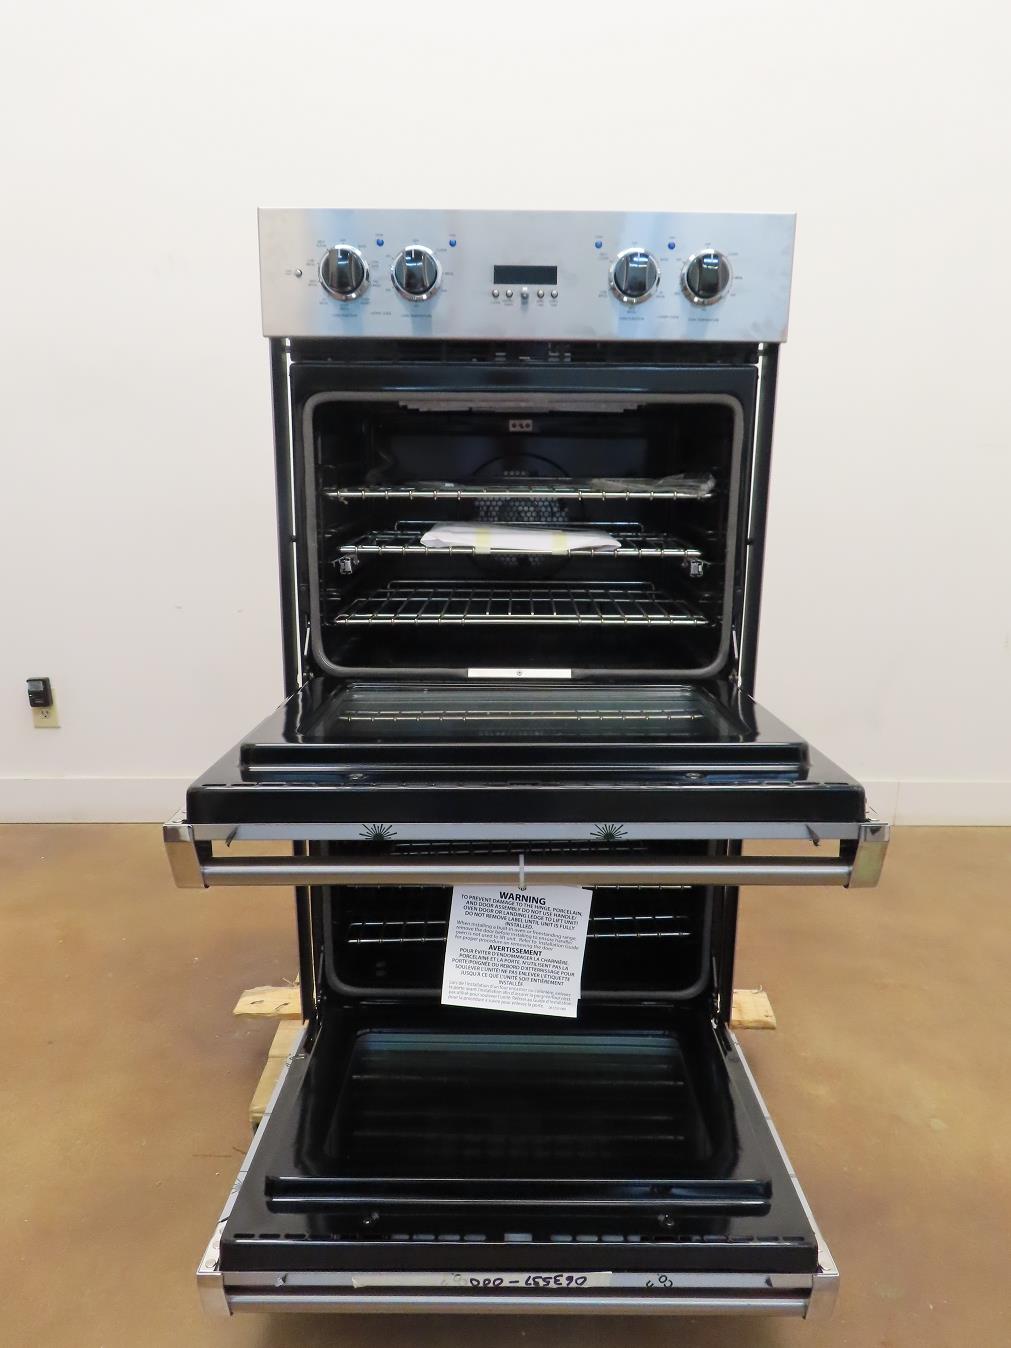 Viking 5 Series 60 in. 9.4 cu. ft. Convection Double Oven